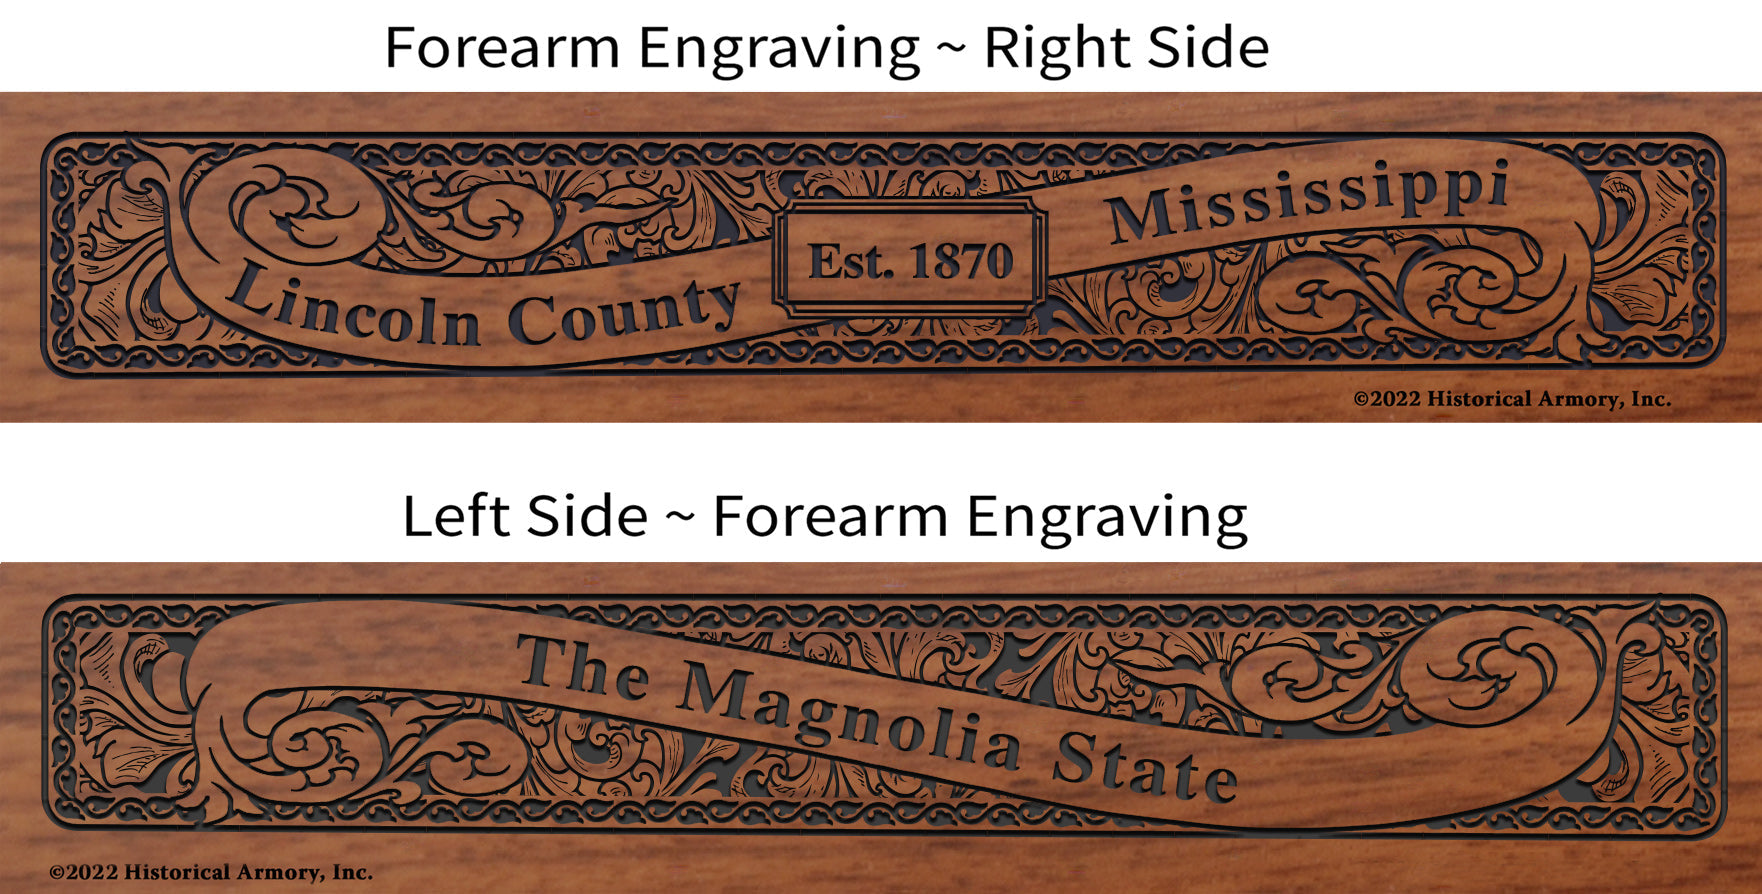 Lincoln County Mississippi Engraved Rifle Forearm